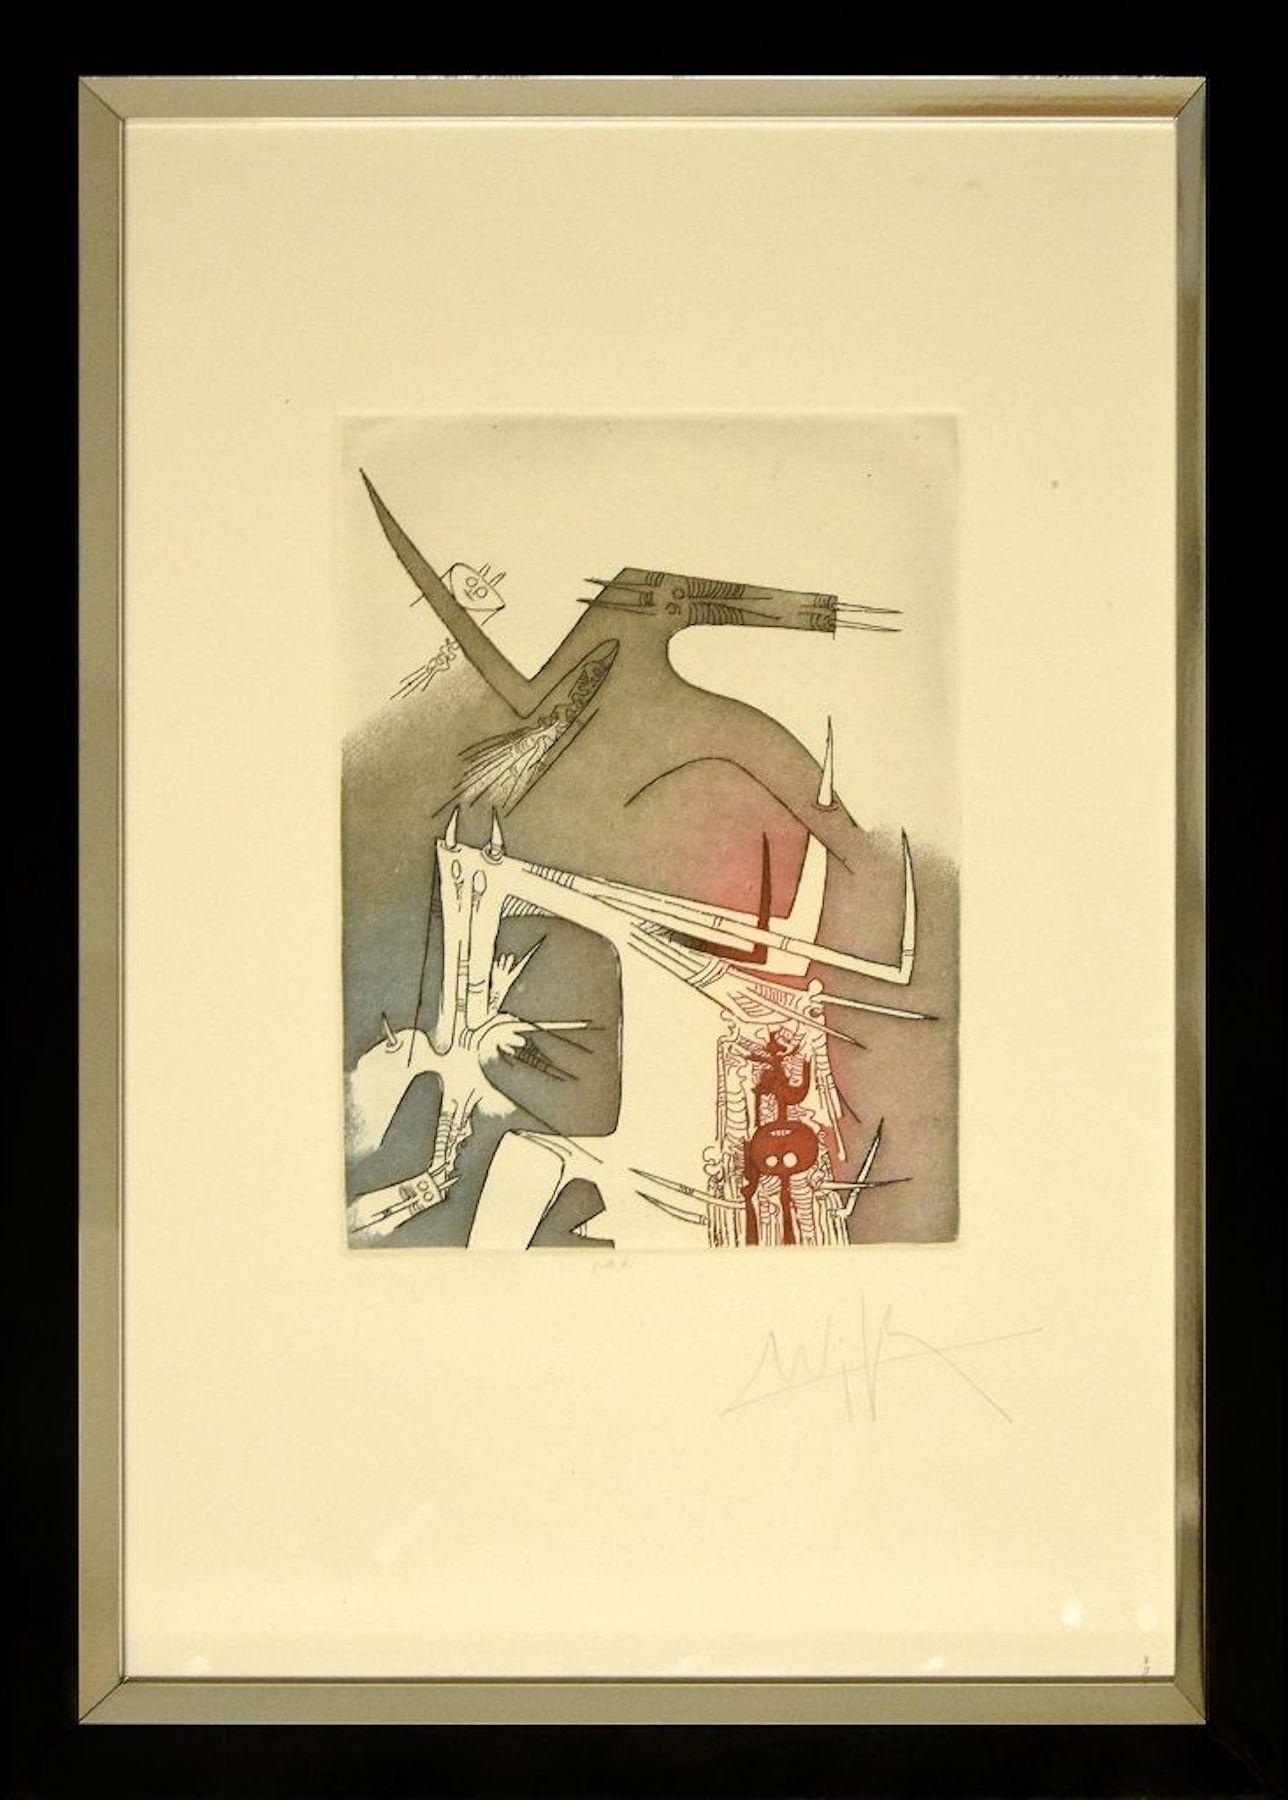 Fantastic Composition is an original print (colored etching and aquatint) signed in pencil by Wifredo Lam.
Image dimensions: 26.3x36 cm.
This is a wonderful artist's proof, as reported in pencil under the image 